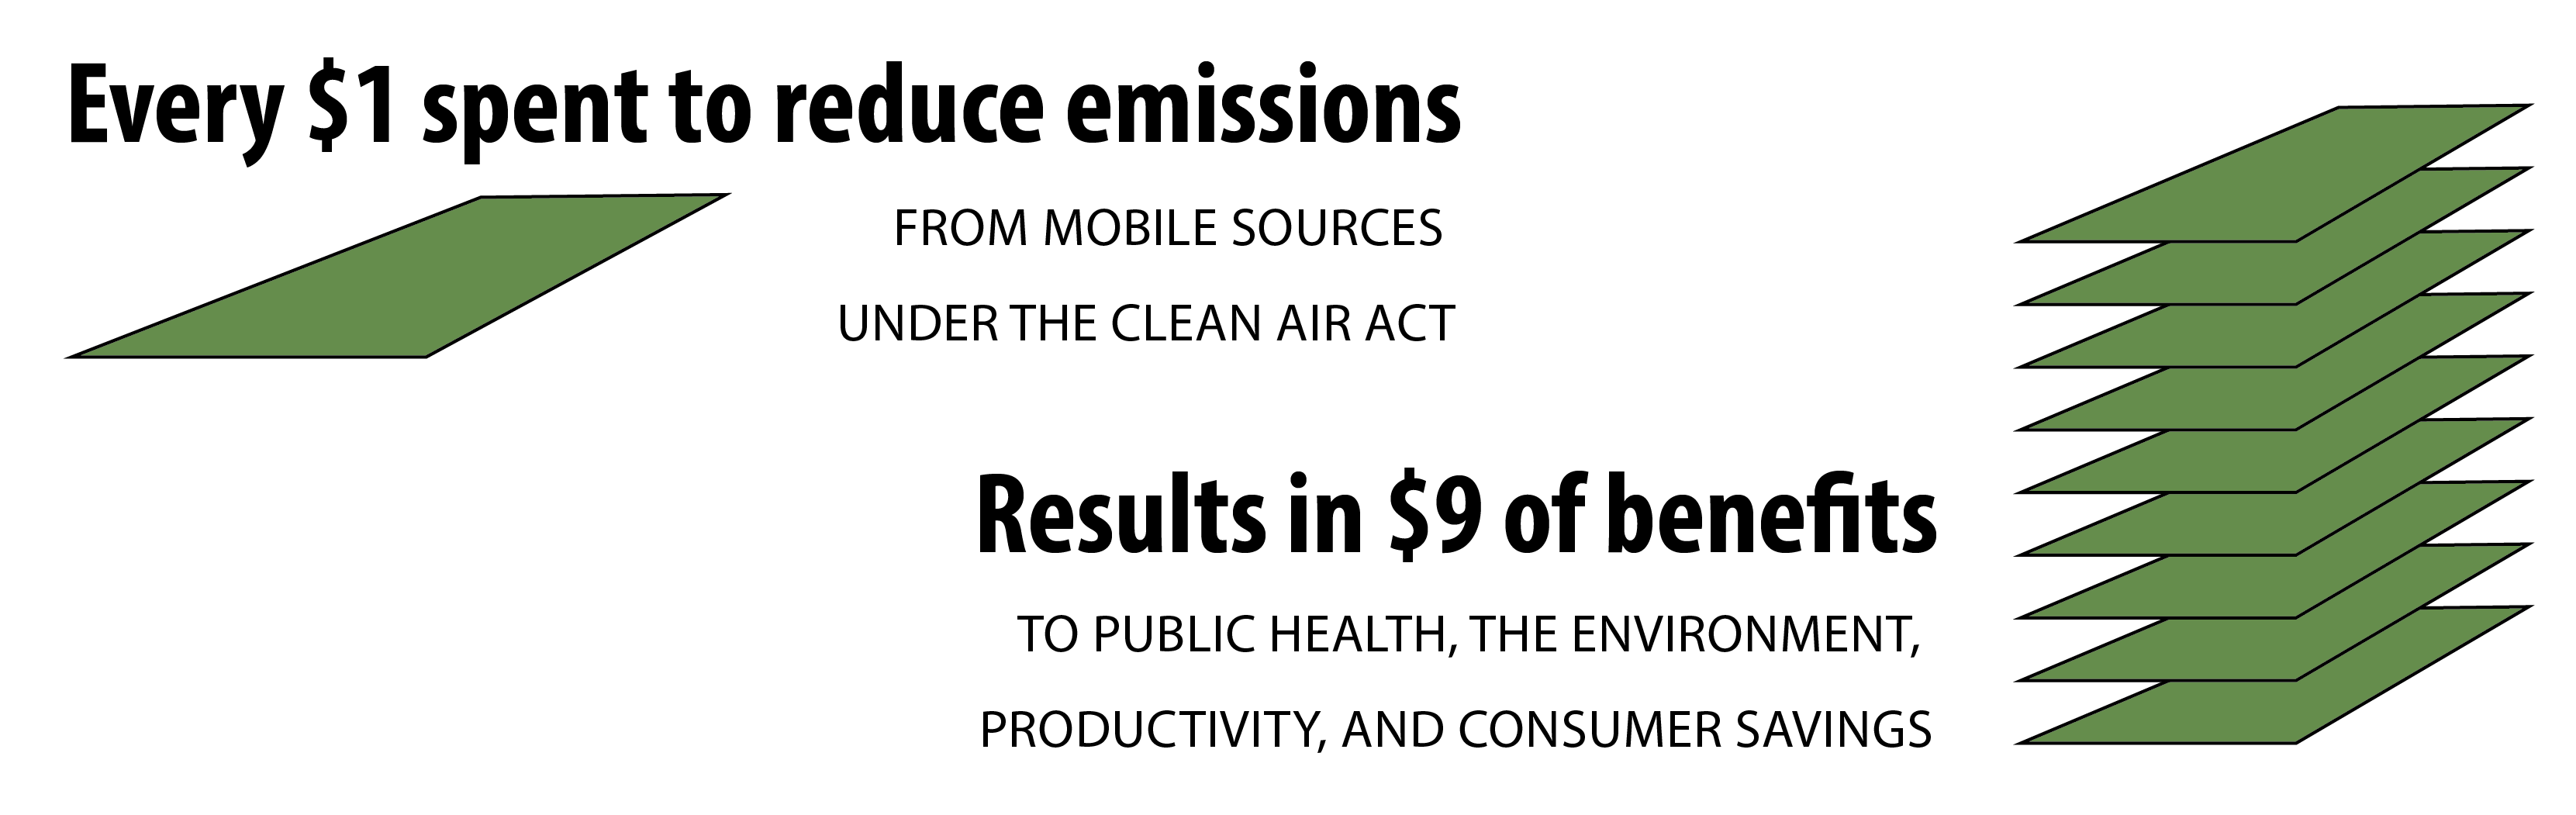 Every dollar spent to reduce emissions from mobile sources under the Clean Air Act results in nine dollars of benefits to public health, the environment, productivity, and consumer savings